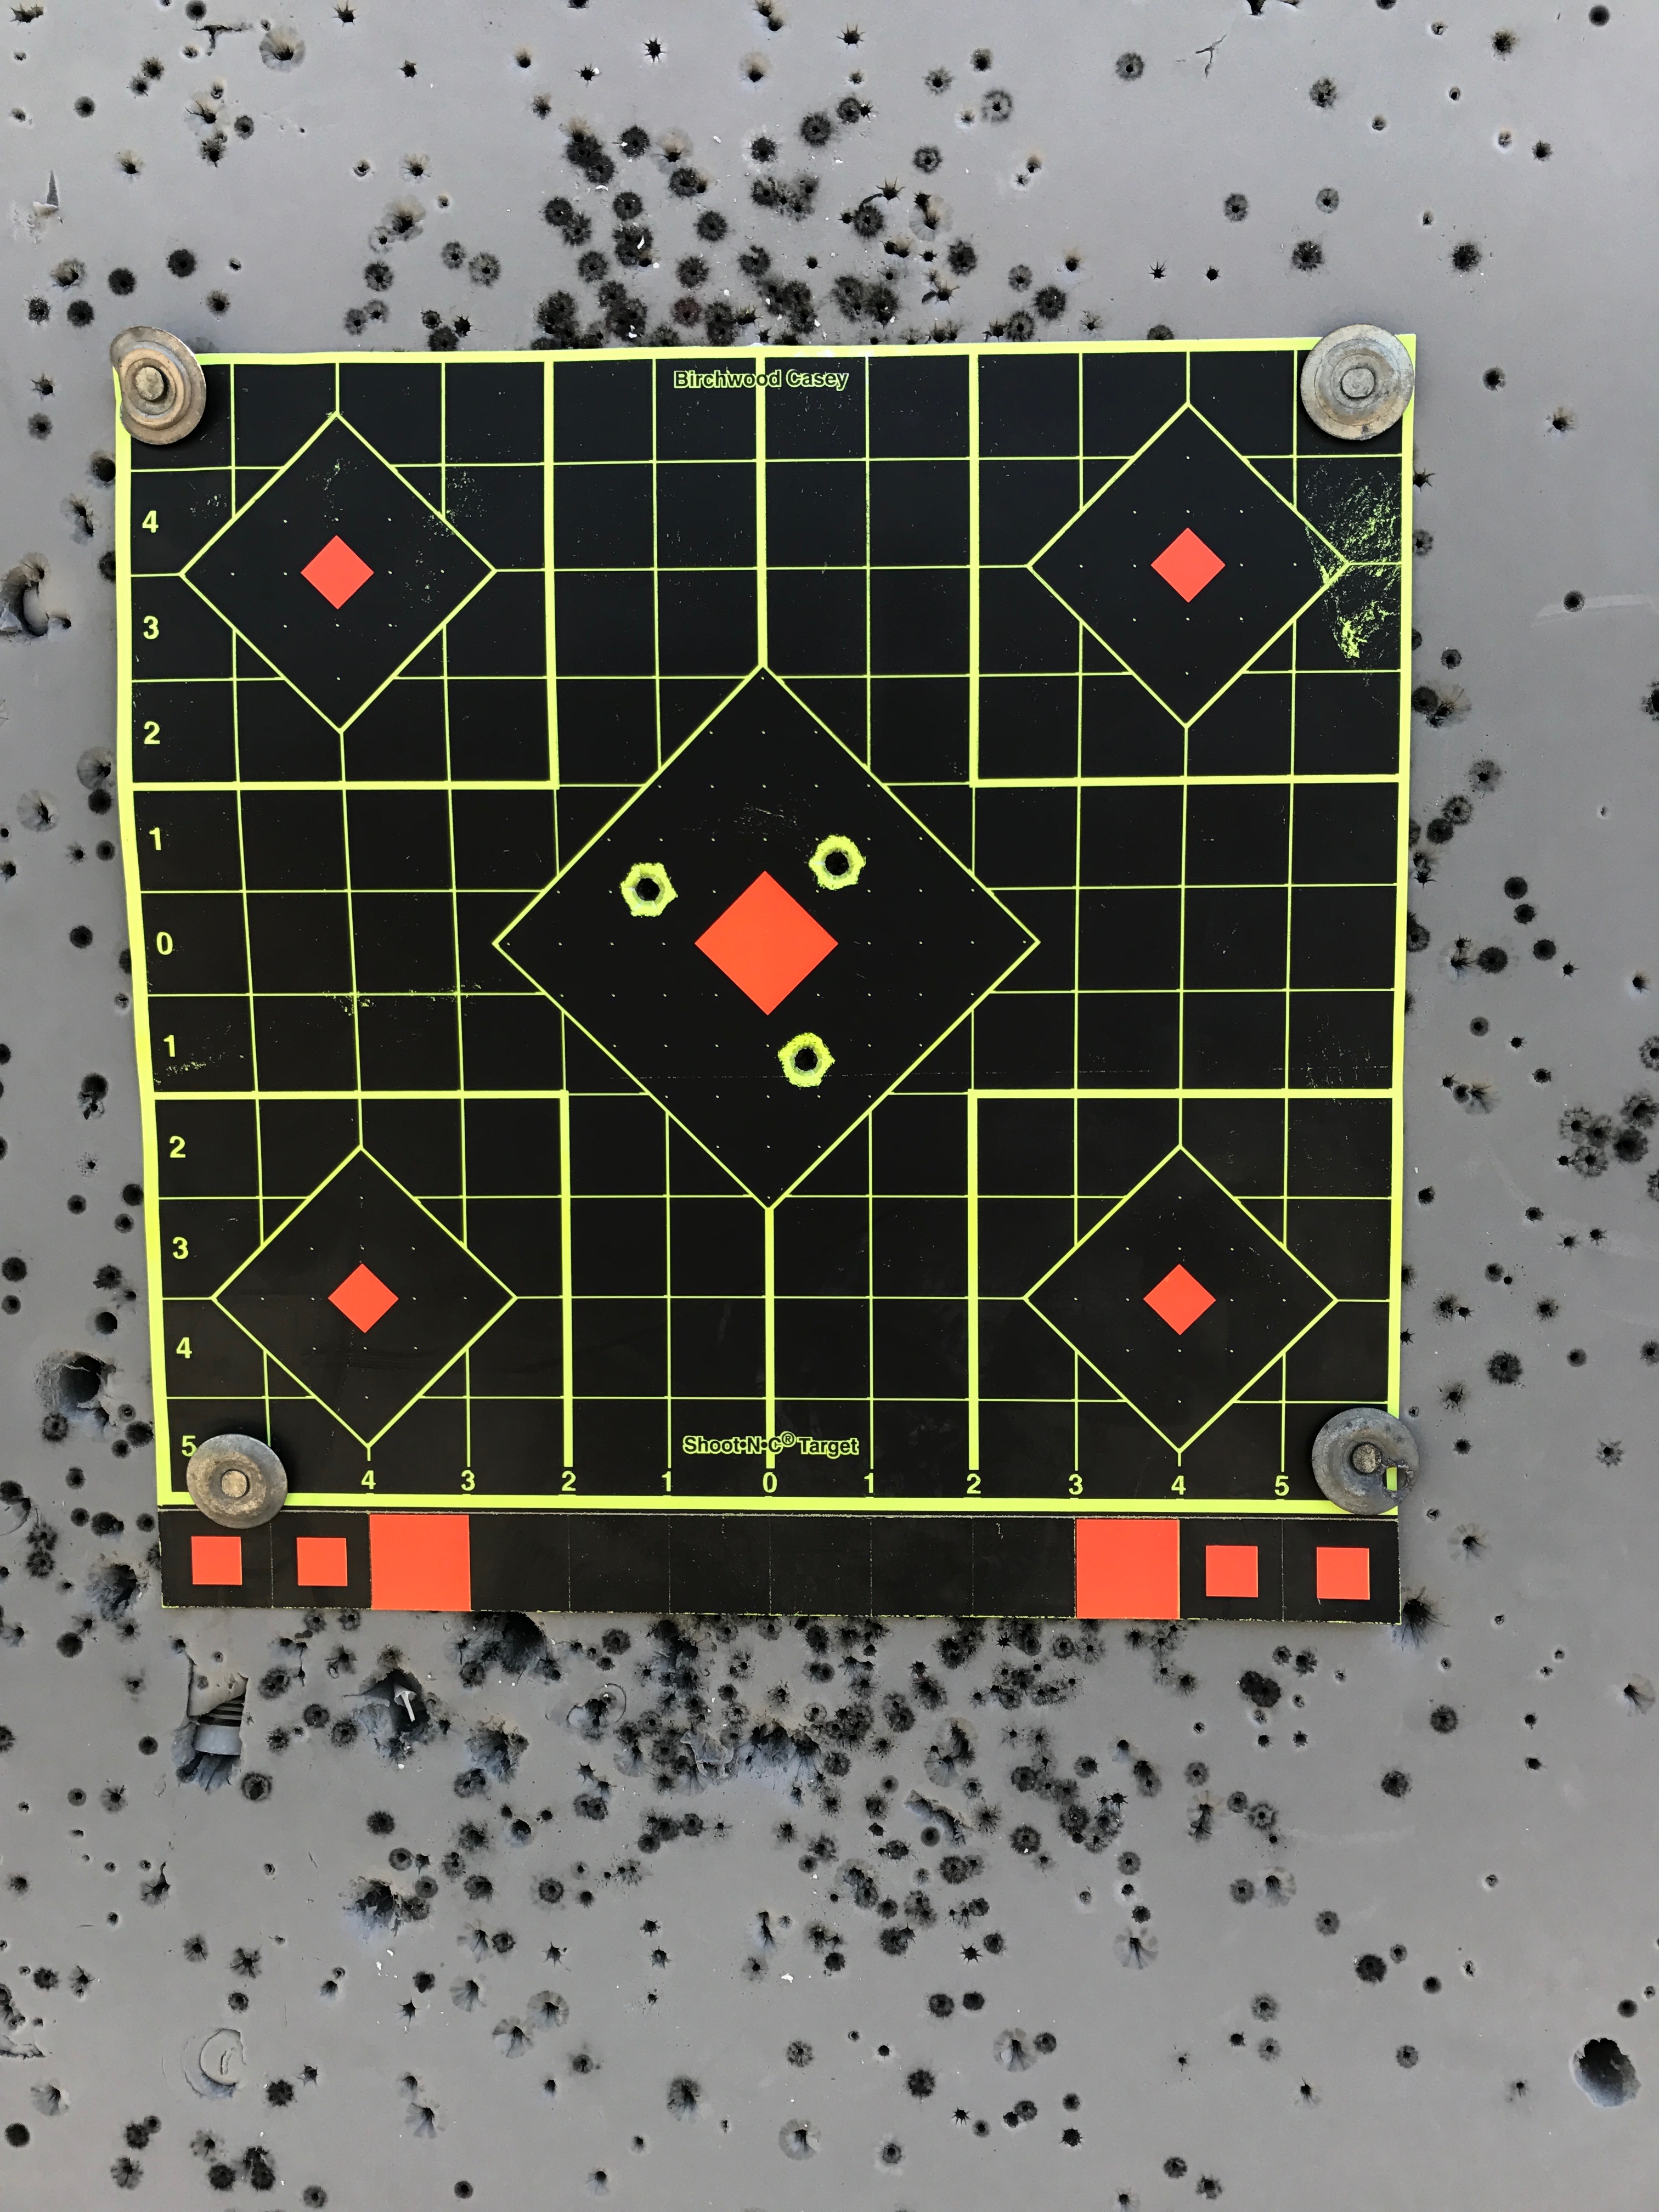 First three shots from bench at 53 yards (1 x 1&quot; red center target).  Without 8 power binoculars, I had no idea!